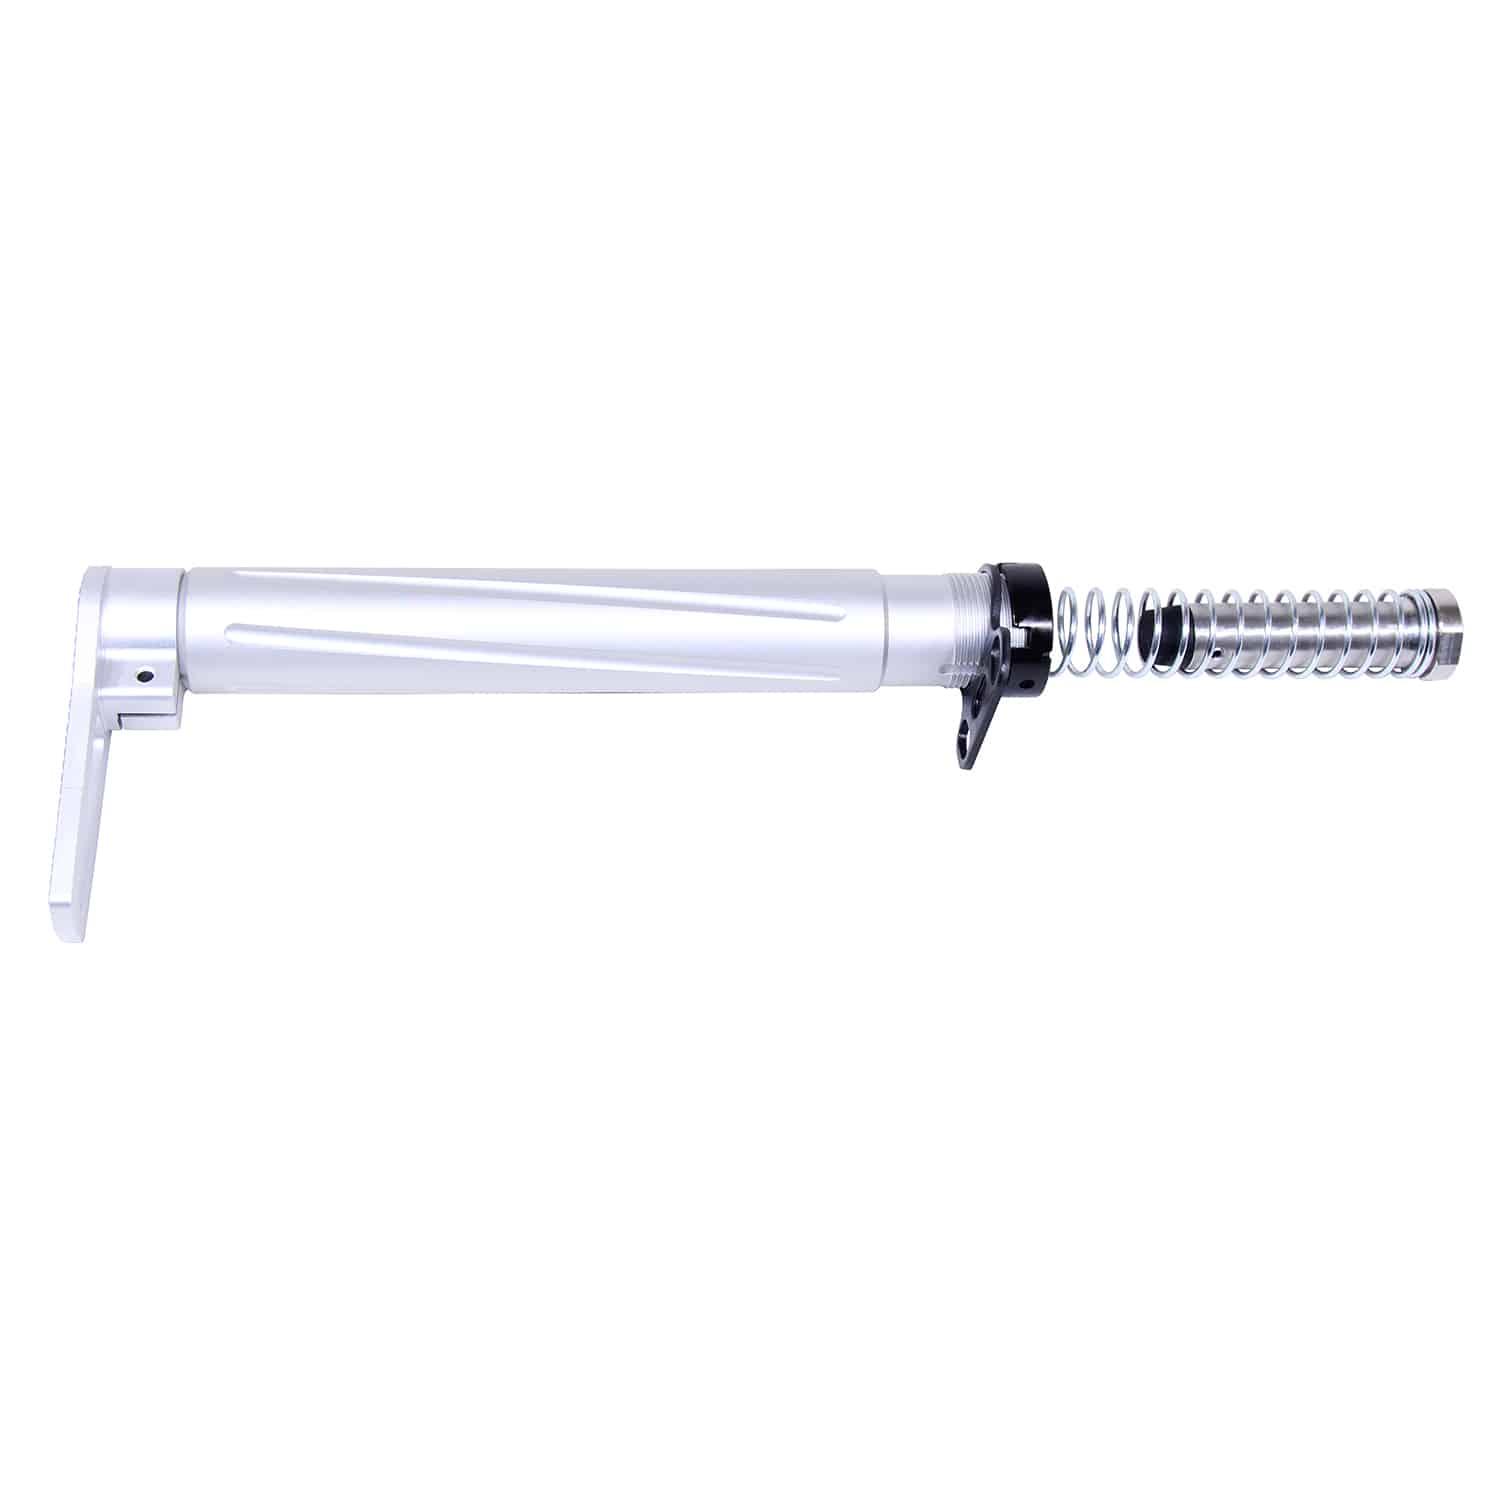 AR-15 Airlite Series Skeleton Stock in Anodized Clear Aluminum